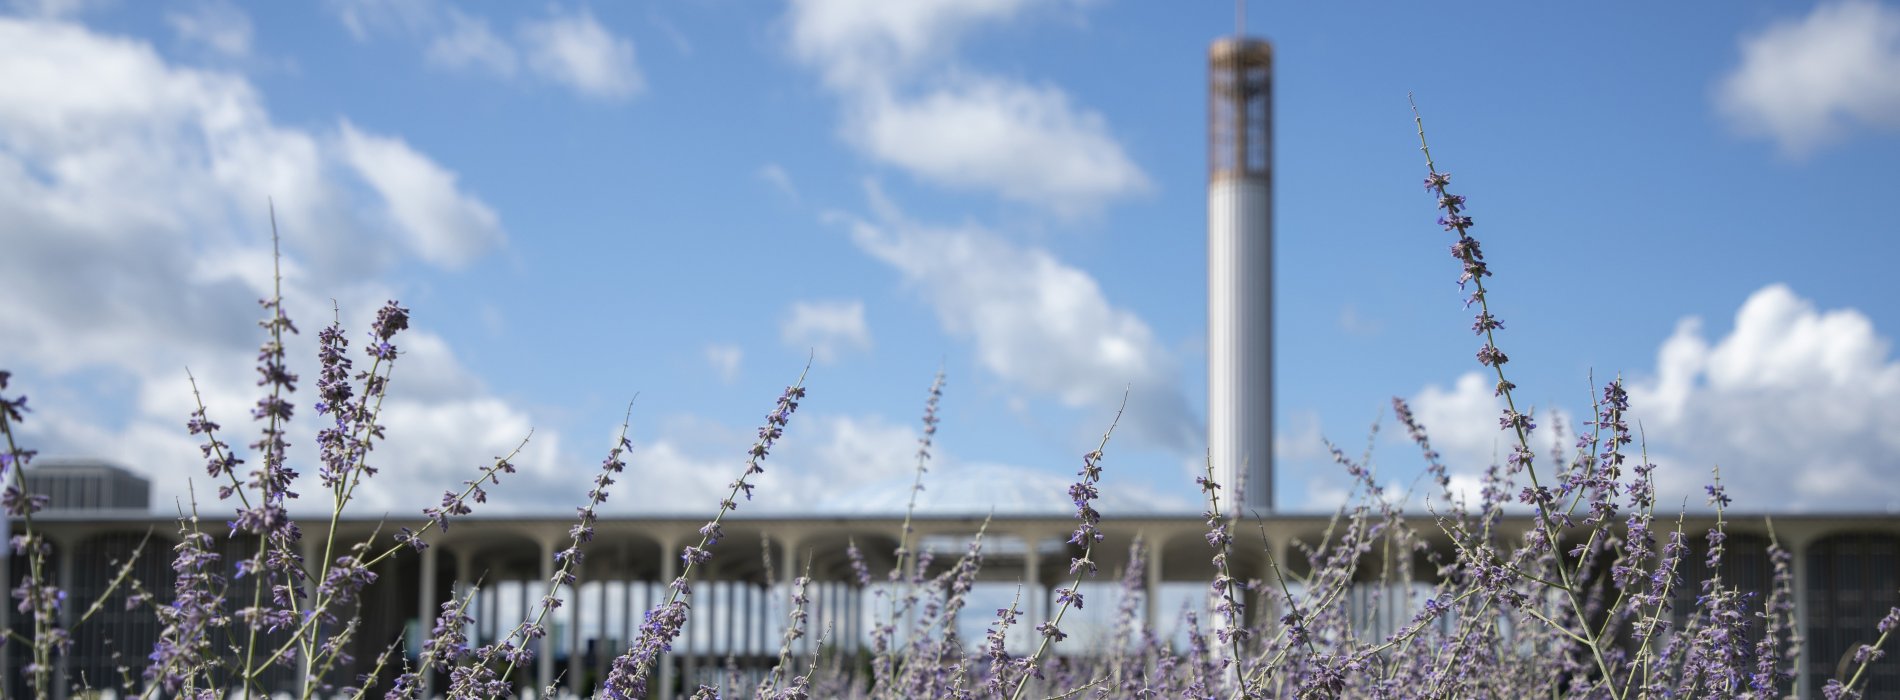 A view of the Academic Podium from afar, with the water tower visible beyond an array of purple flowers